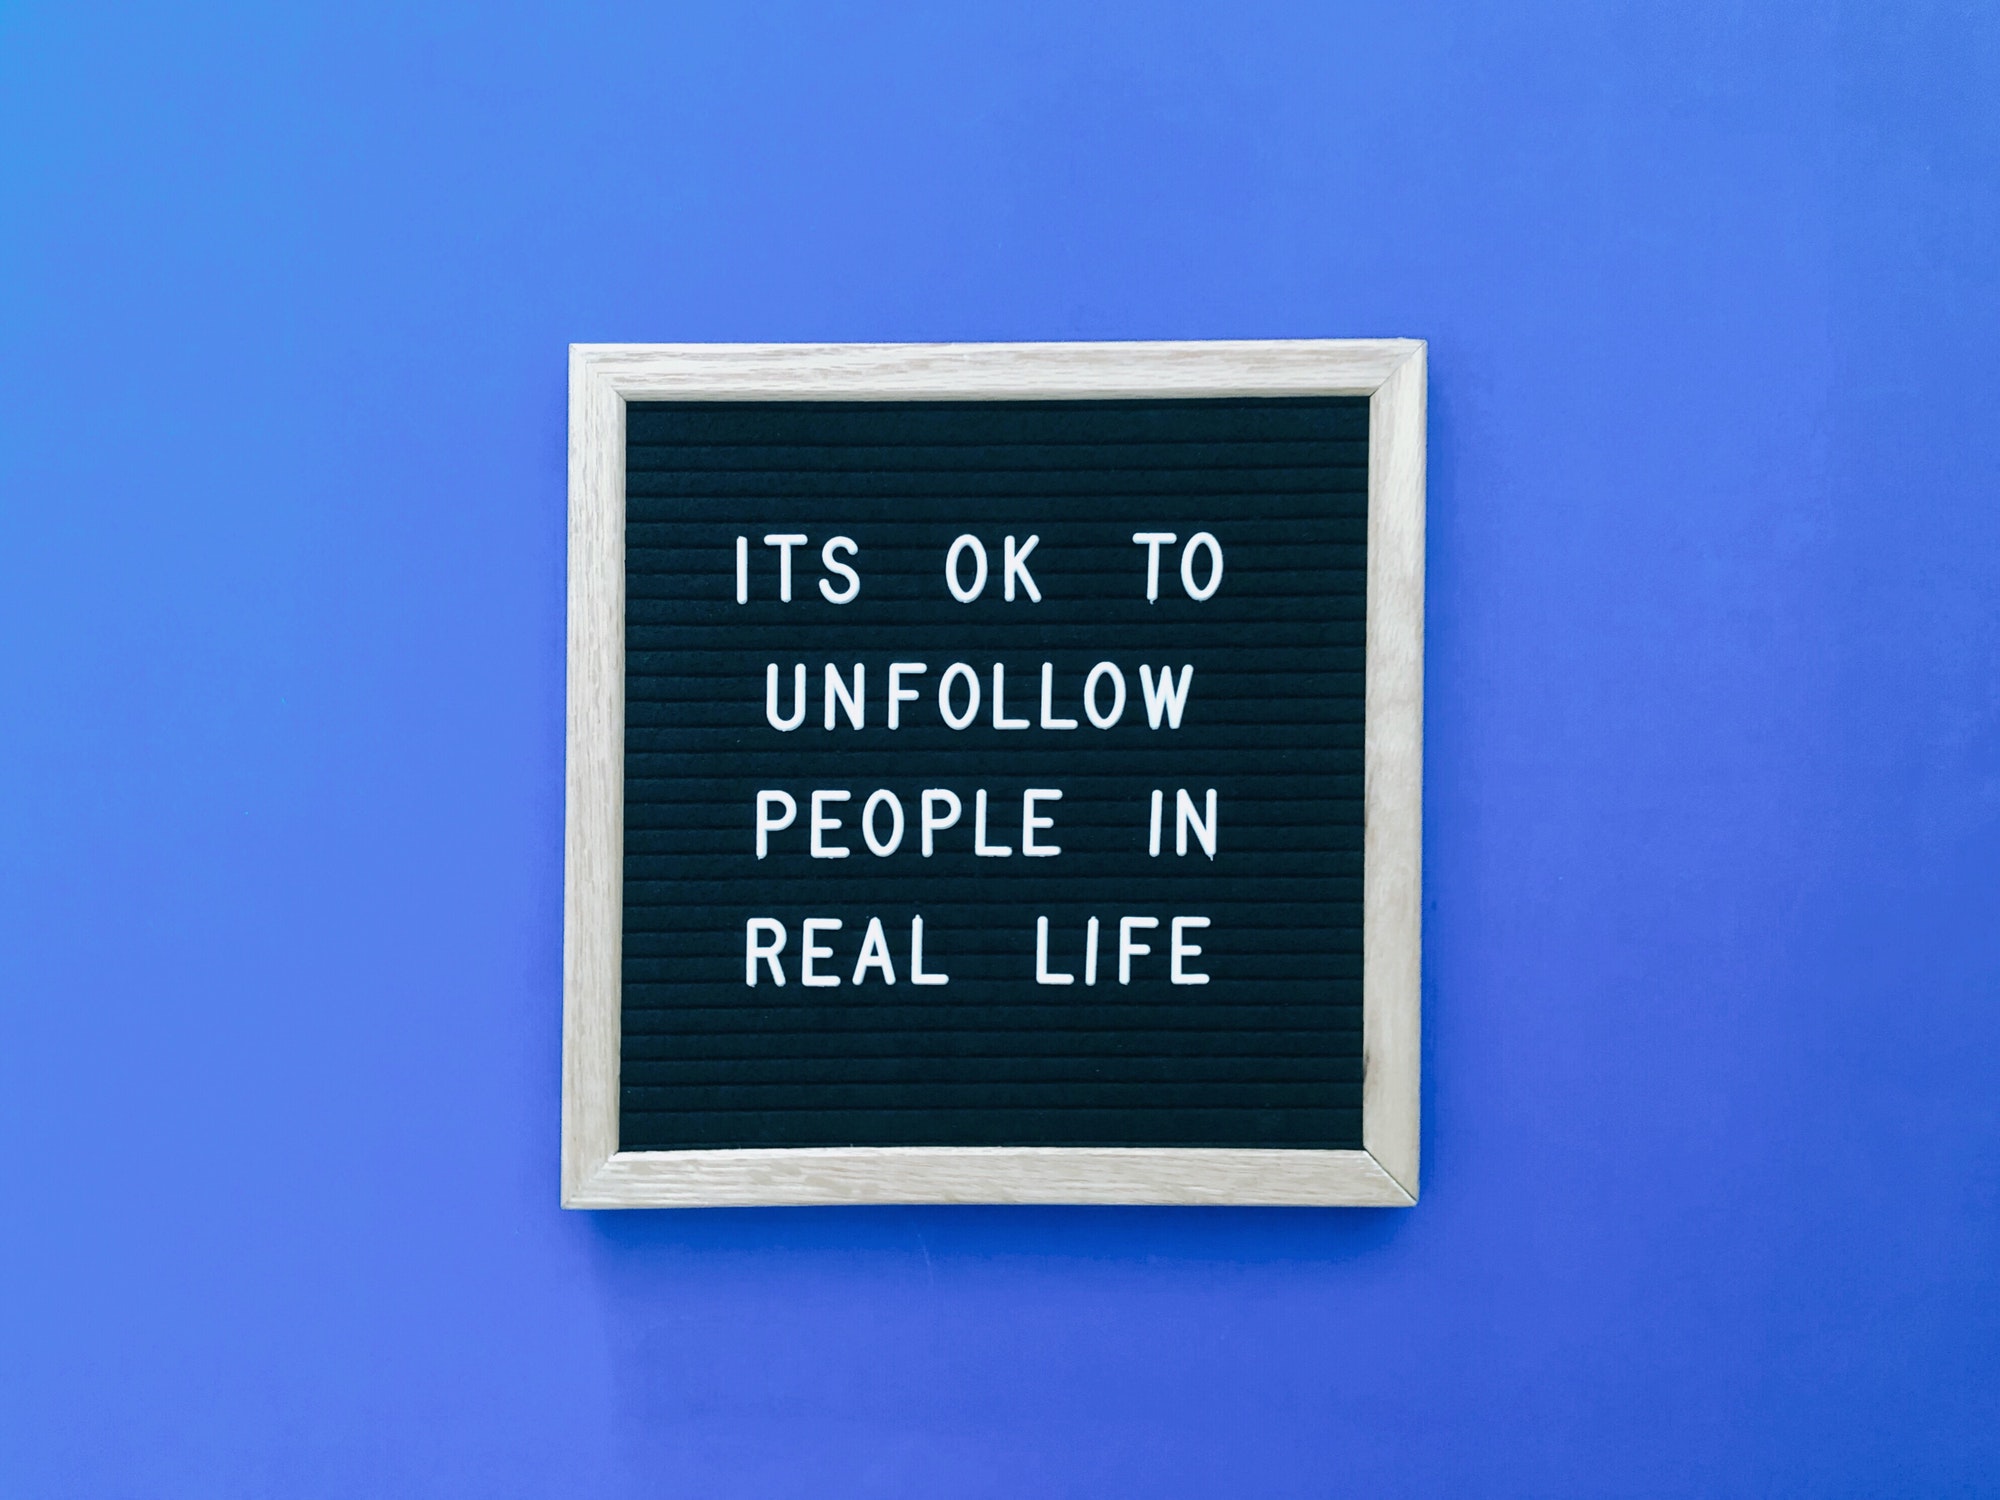 Why Do People Unfollow on Instagram?